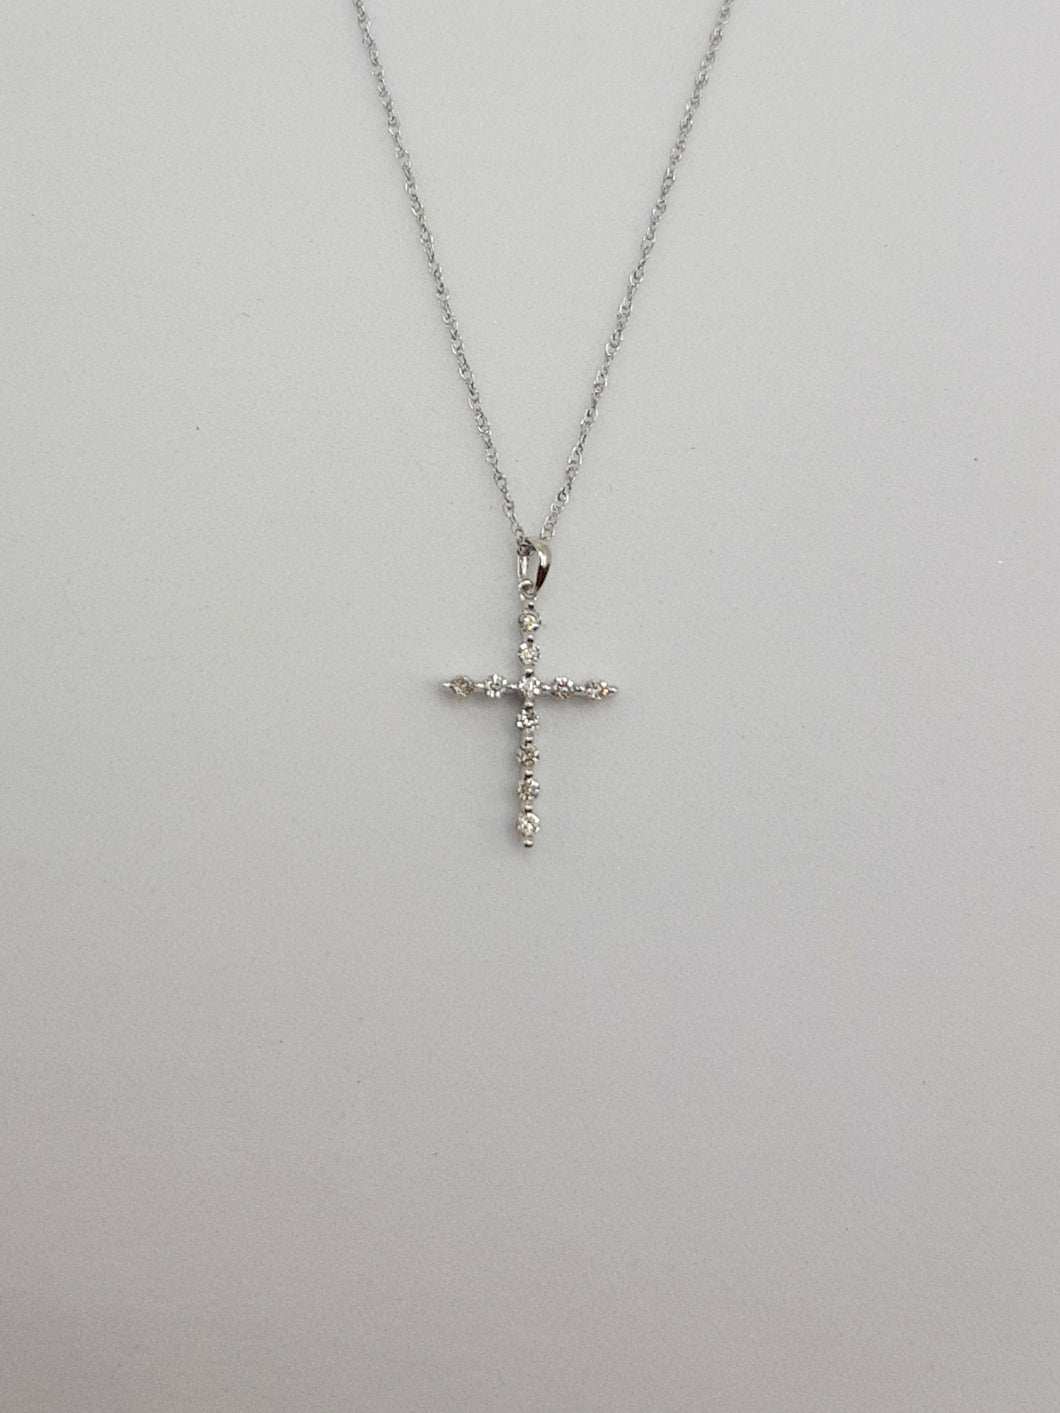 10Kt White Gold Cross Featuring .11 Carats of Natural Diamonds on 20